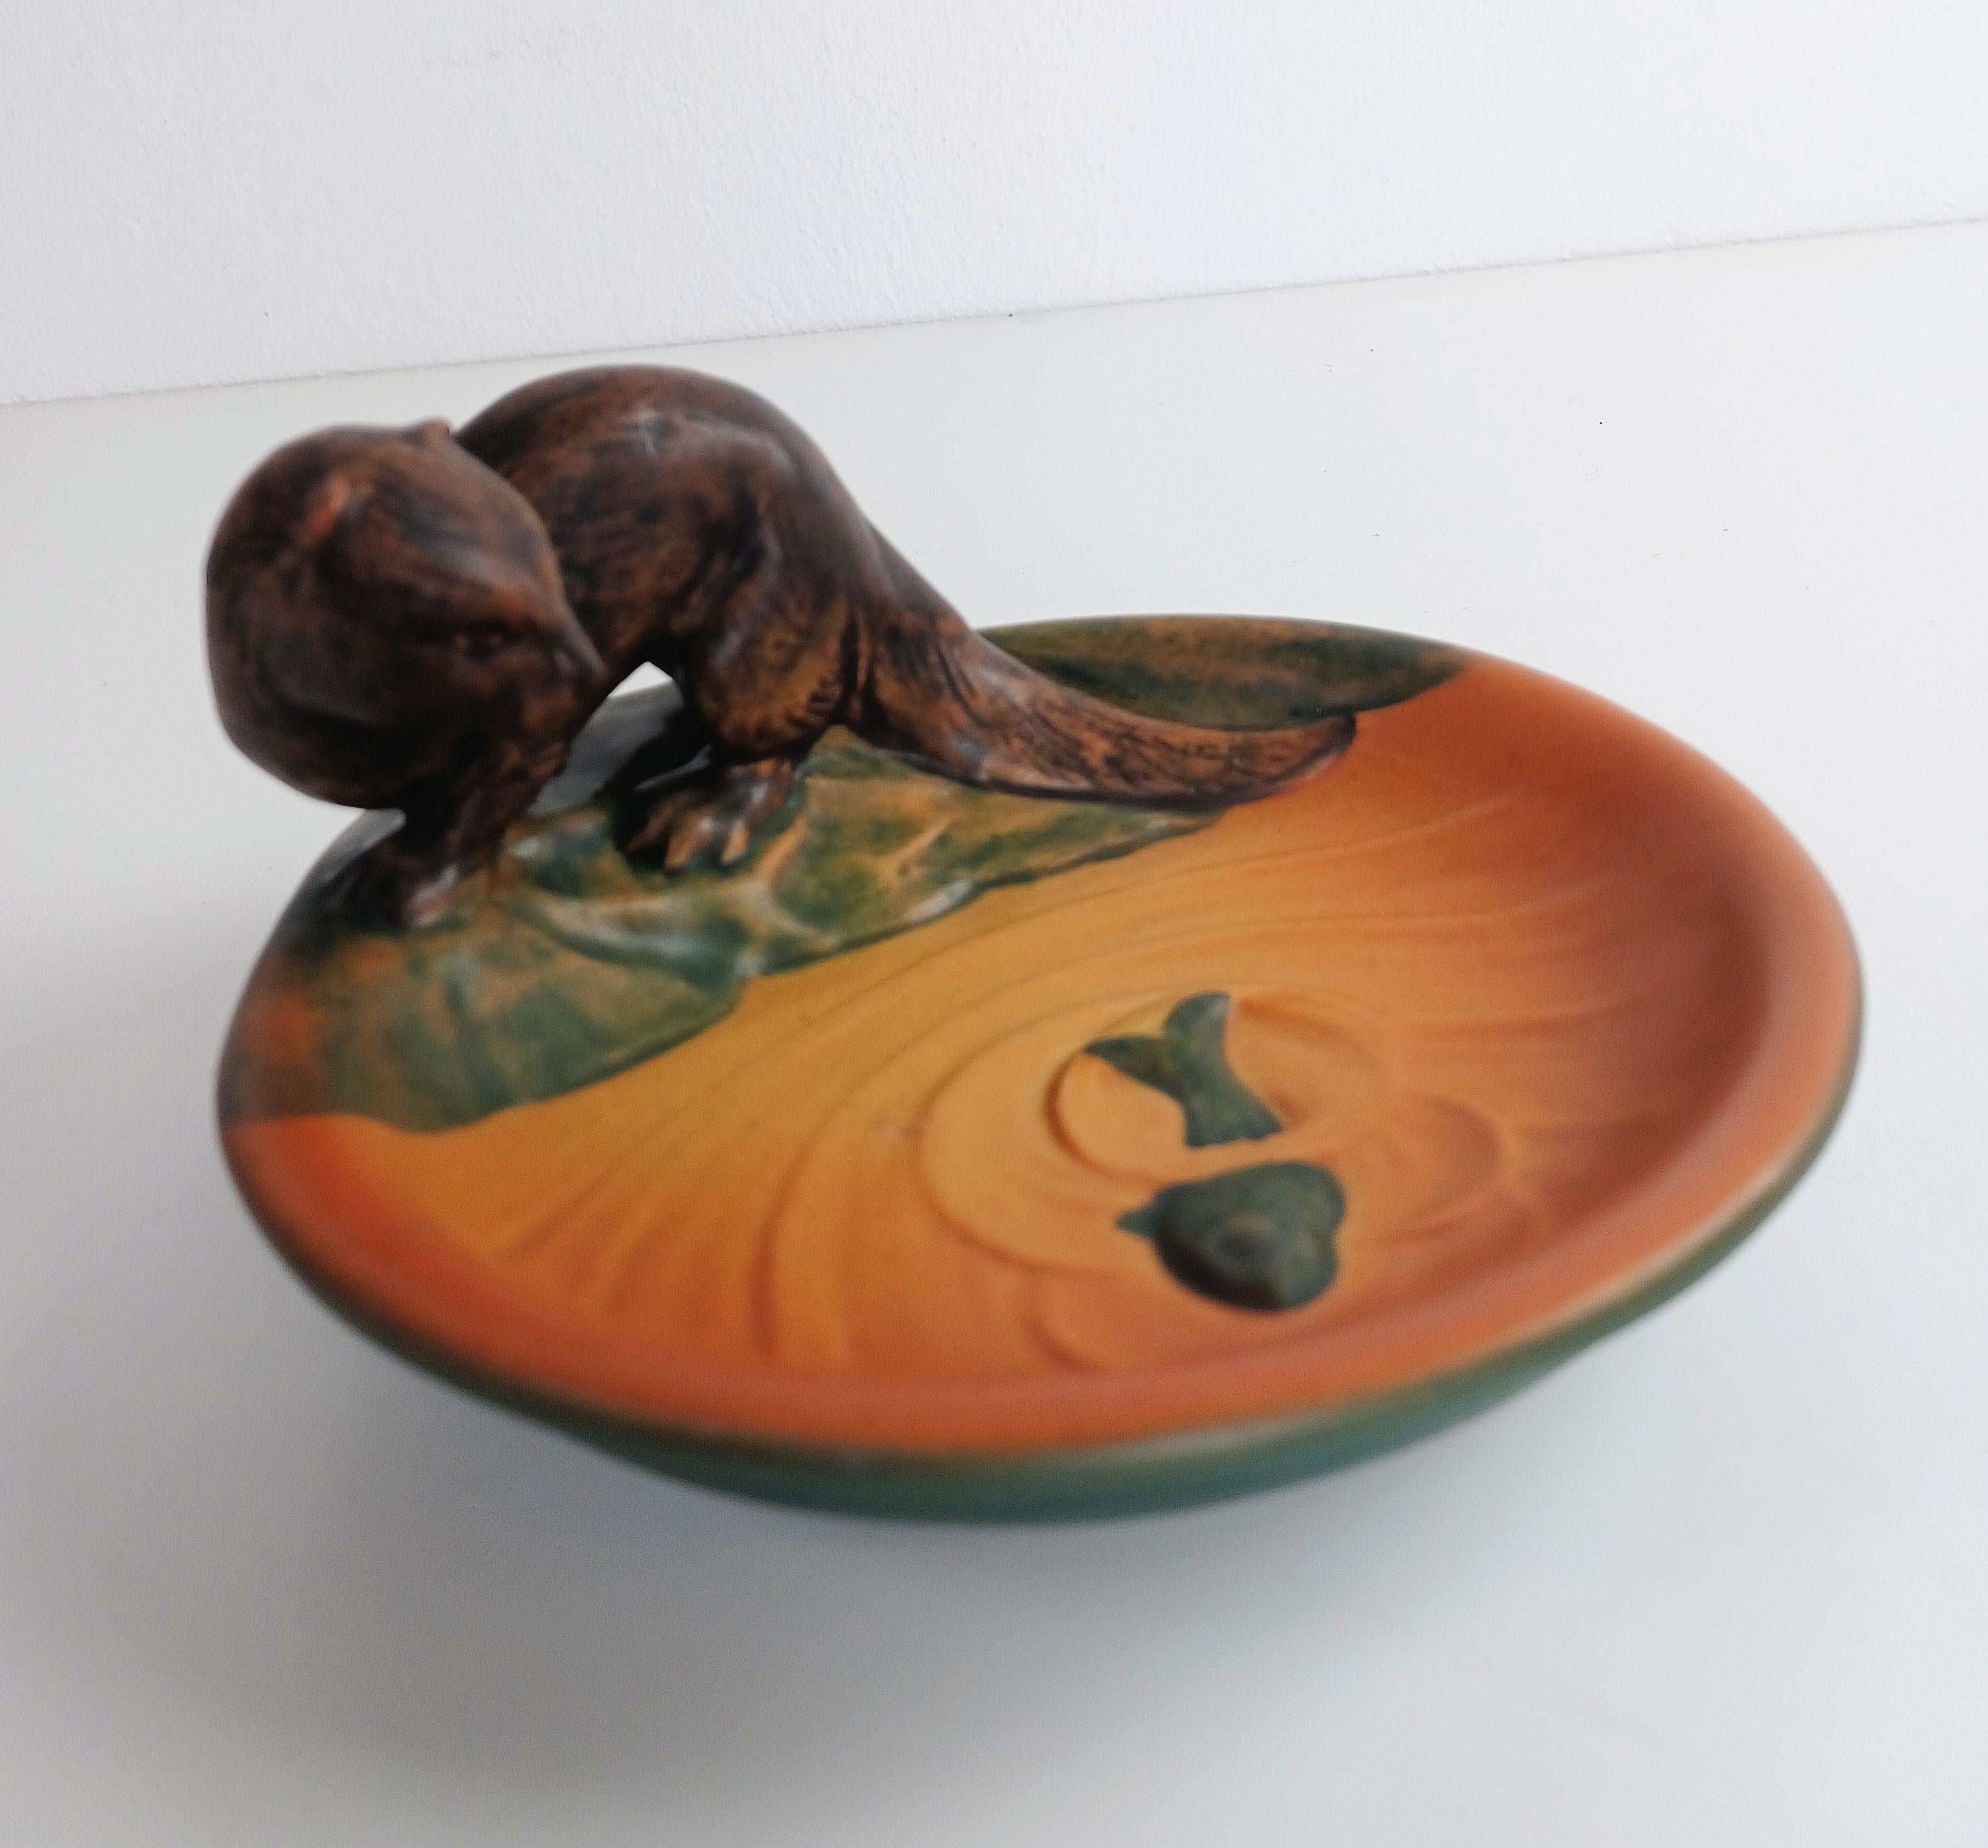 1930s Danish Hand-Crafted Art Nouveau Polecat Ash Tray / Bowl by P. Ipsens Enke In Good Condition For Sale In Knebel, DK